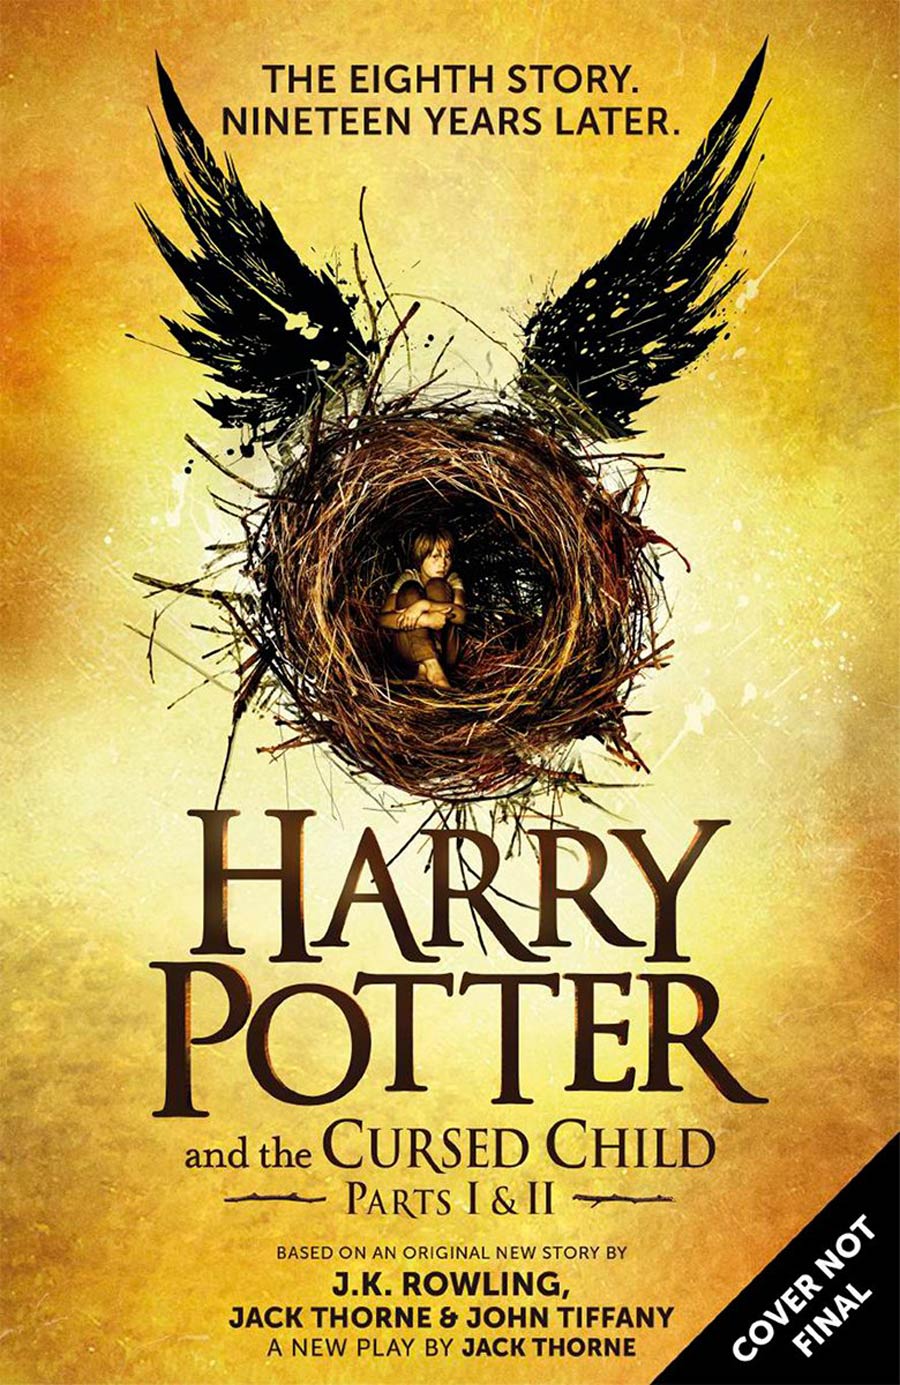 Harry Potter And The Cursed Child Parts I & II HC Special Rehearsal Edition